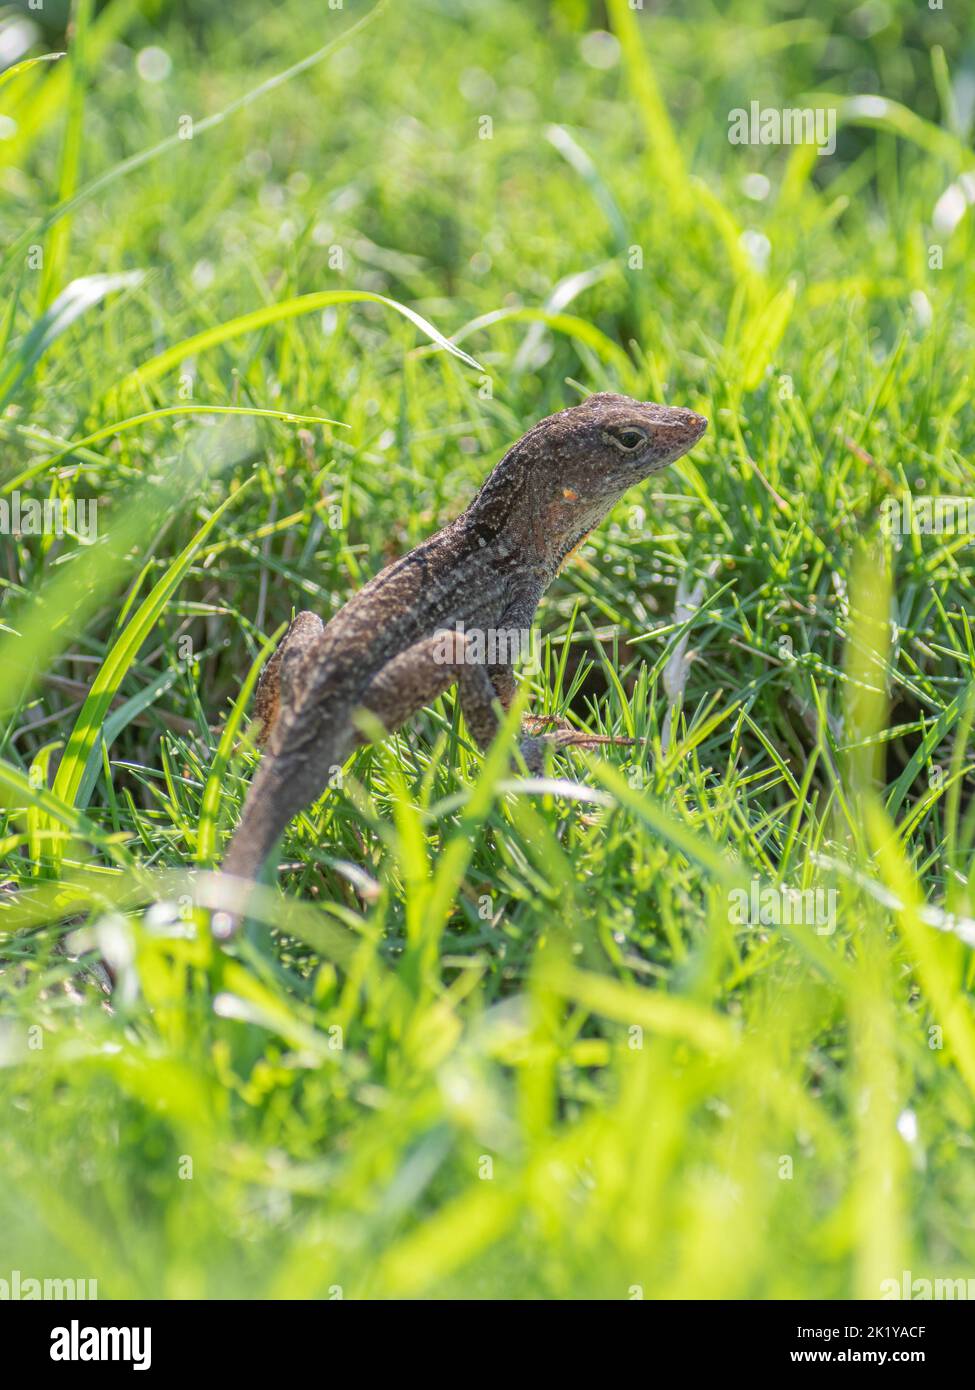 Pattern and texture details of a brown anole sitting on green grass in the garden. Stock Photo